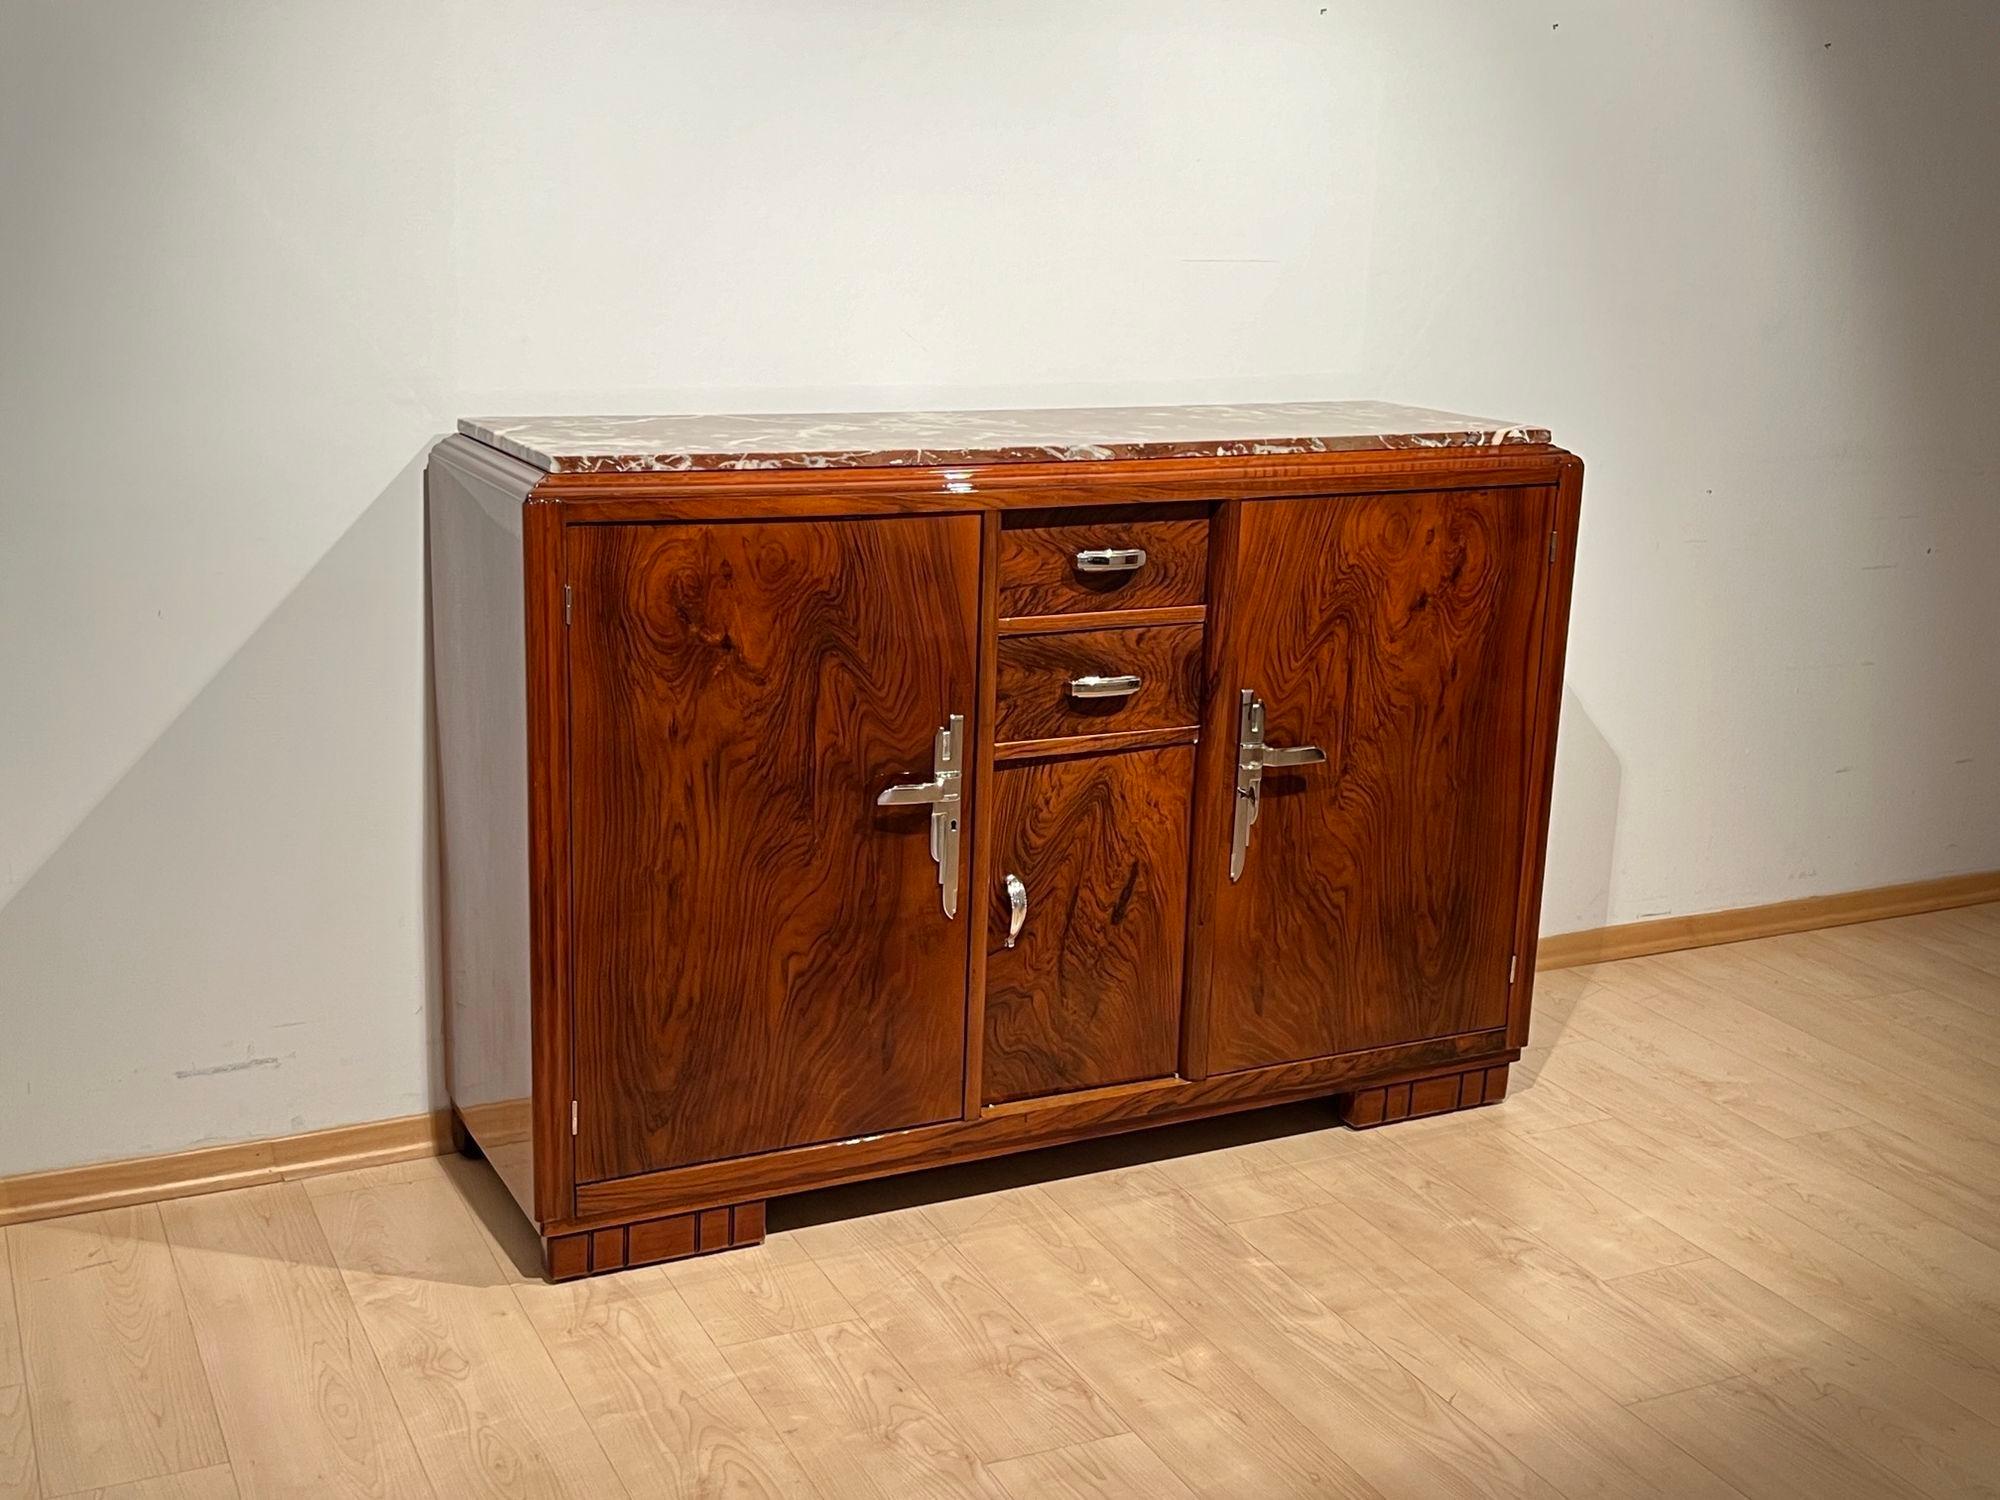 French Art Deco Sideboard, Walnut, Lacquer, Nickel, France circa 1930 For Sale